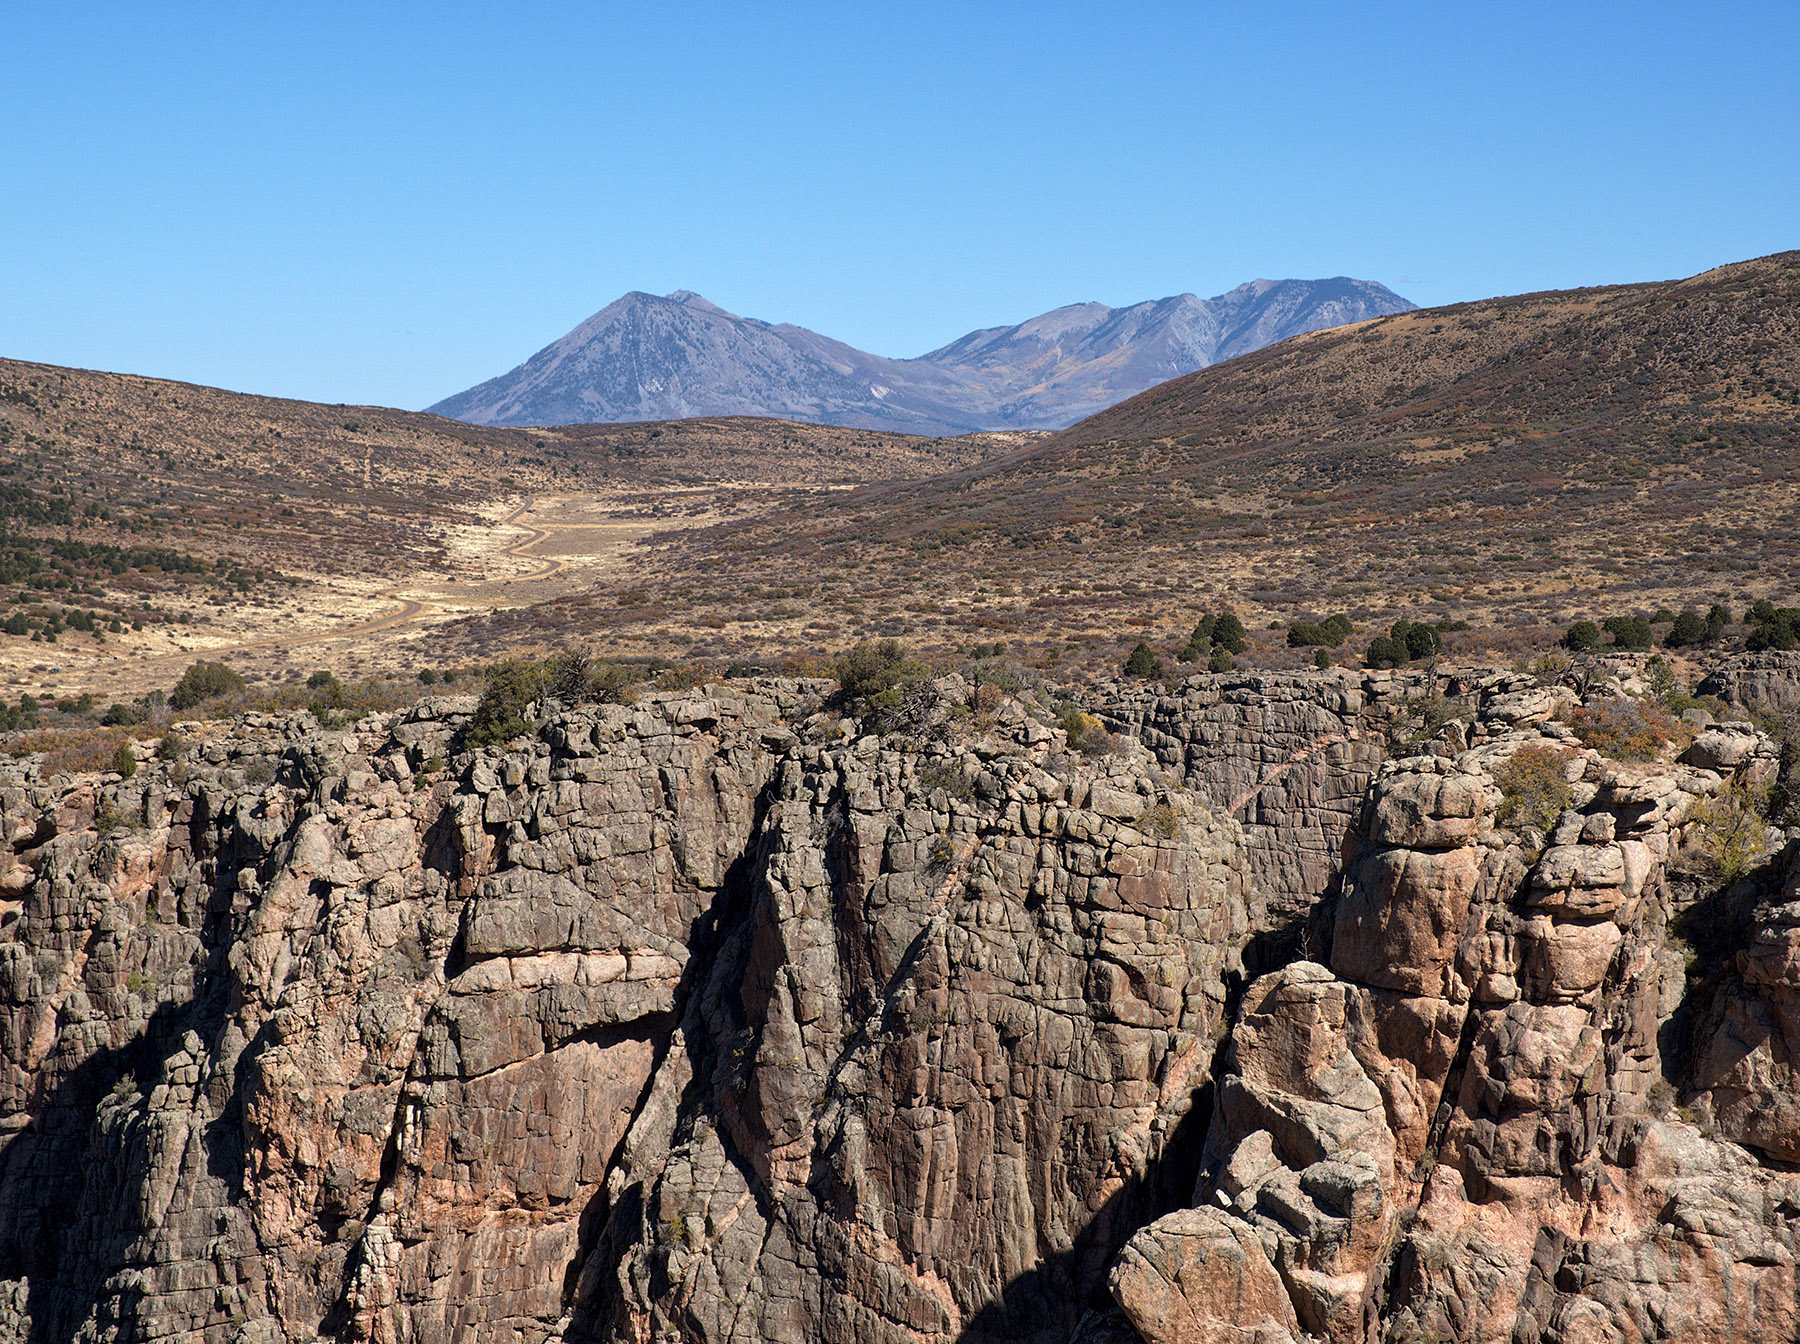 Three geologic formations:  Bottom – Black Canyon of the Gunnison gneiss and pegmatite (1.8 to 1.4 billion years); Middle: Mesozoic eroded sediment (60-90 Ma); Top – Igneous laccoliths of Landsend Peak (left) and Mount Lamborn (right) (~11,000’), West Elk Mountains (23-33 Ma) intruded into sediment and then eroded to igneous rock.